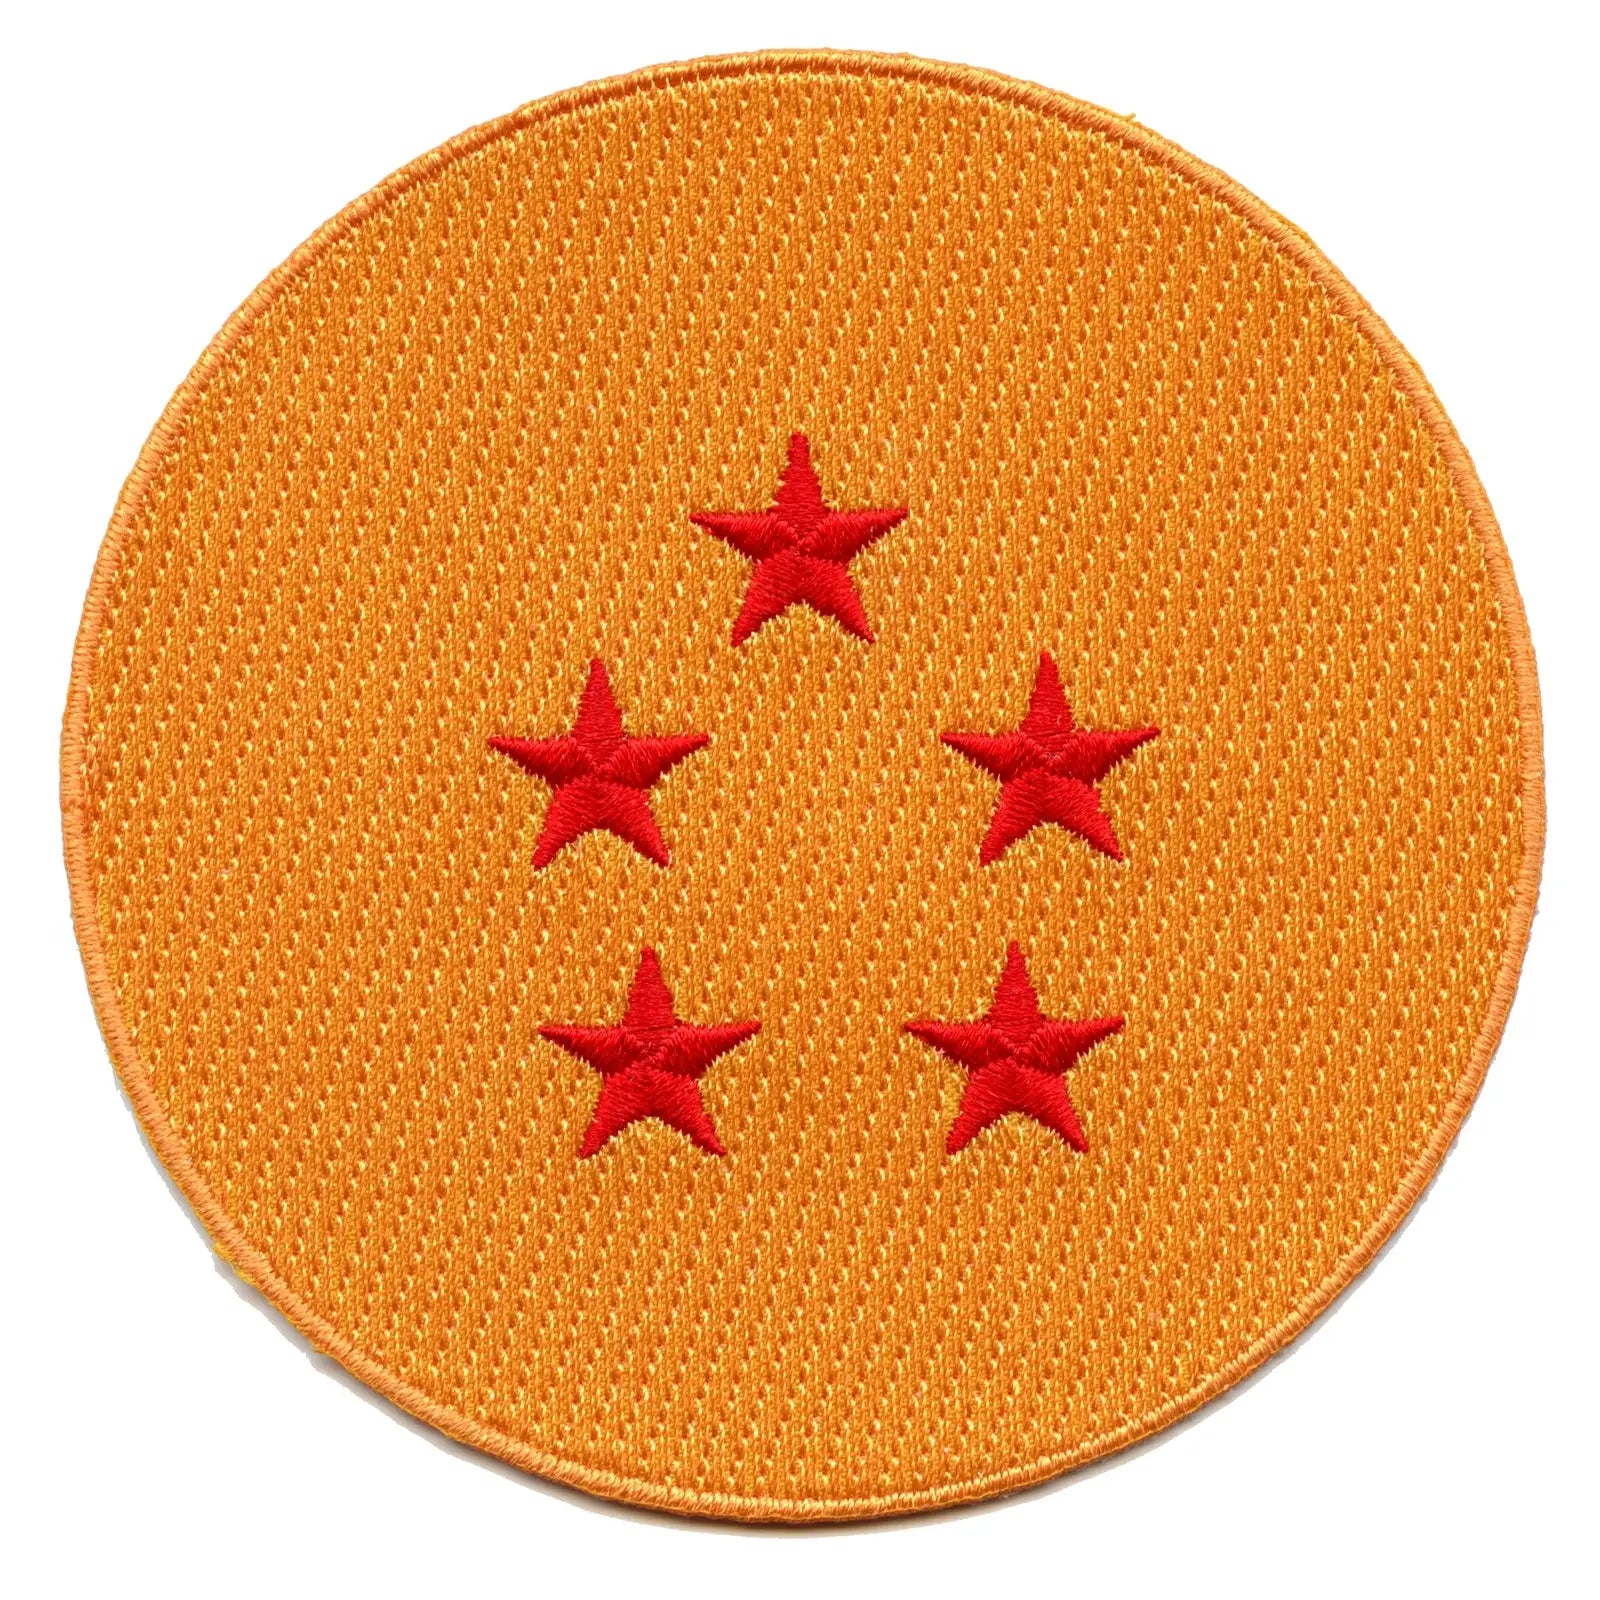 Dragon Ball Z Five Star Dragonball Anime Embroidered Iron On Patch 